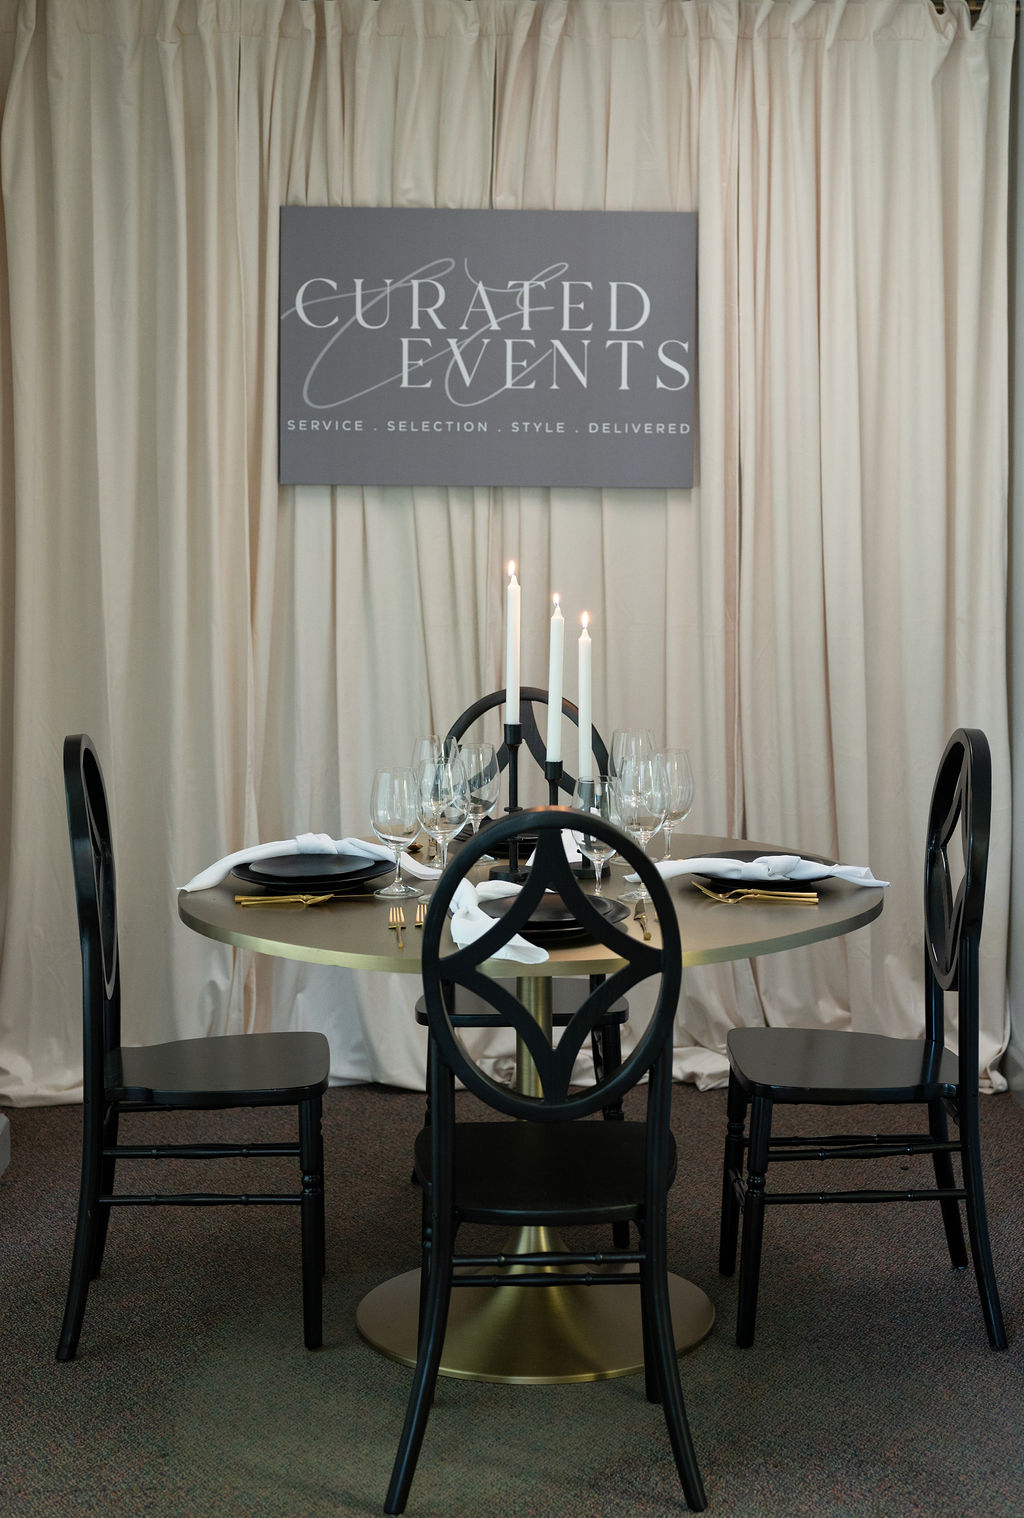 Curated Events Chesapeake Event Rental Showroom 5